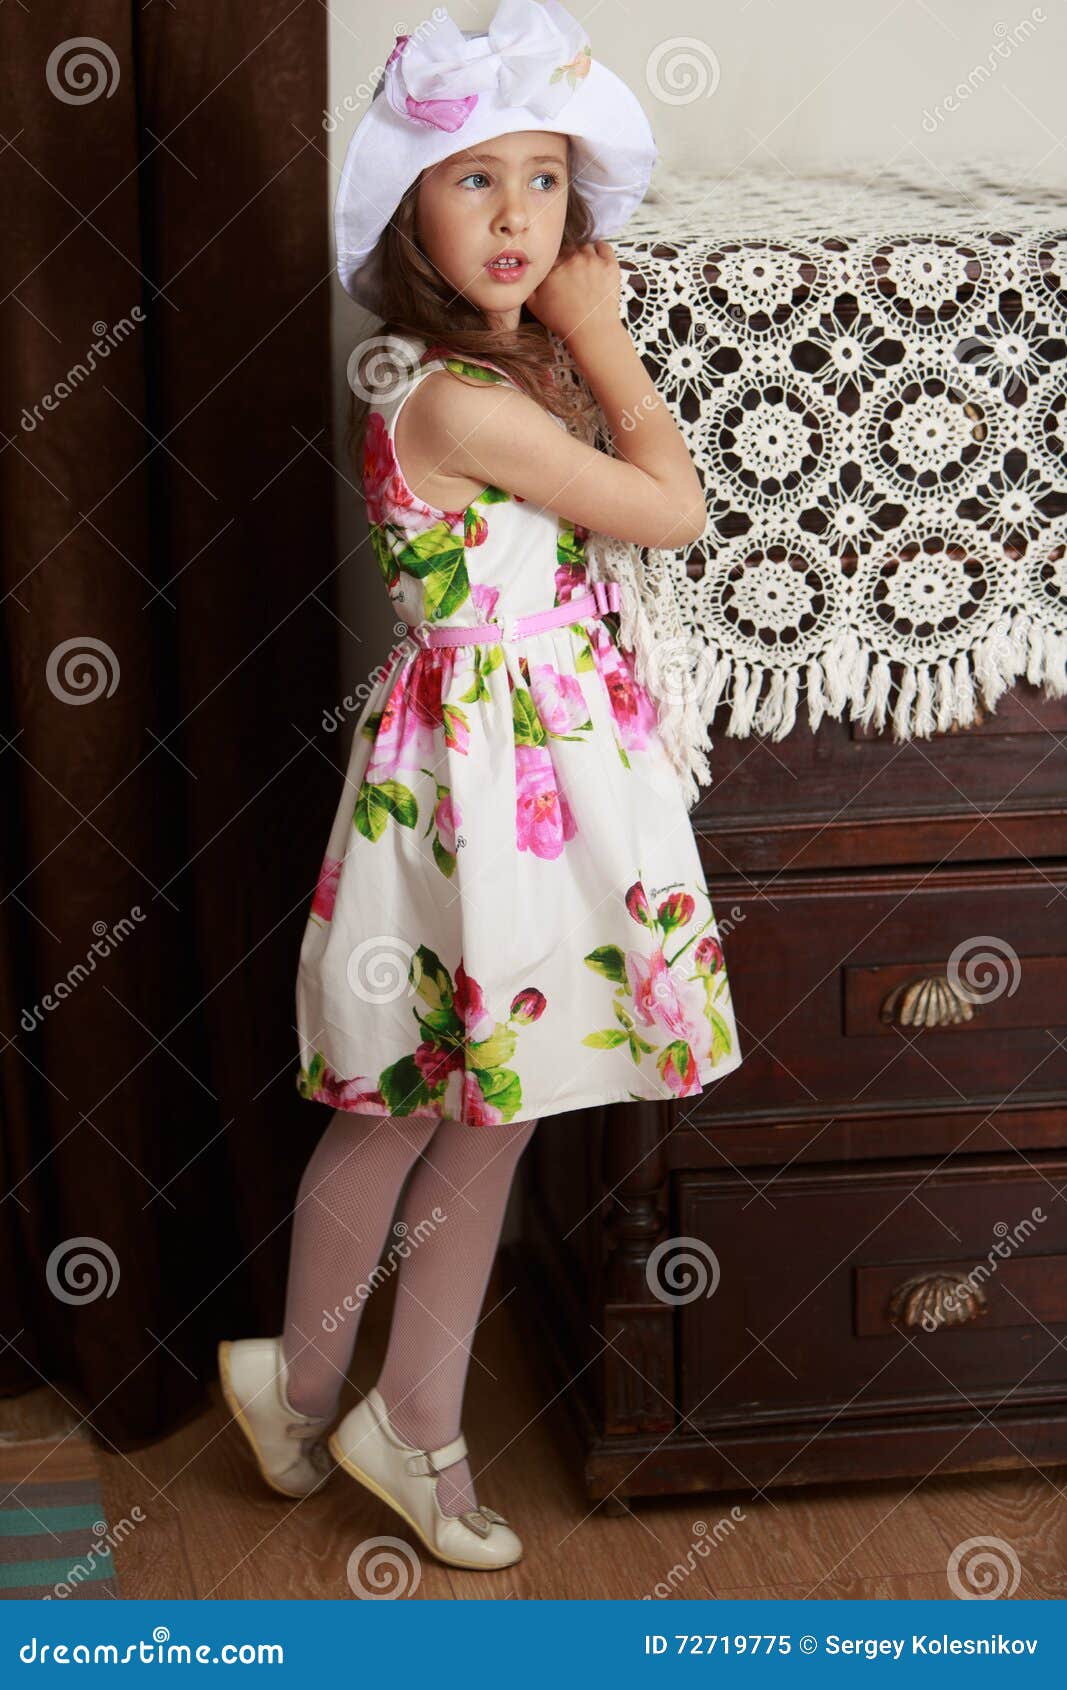 The Girl By The Chest Of Drawers Stock Image Image Of Portrait